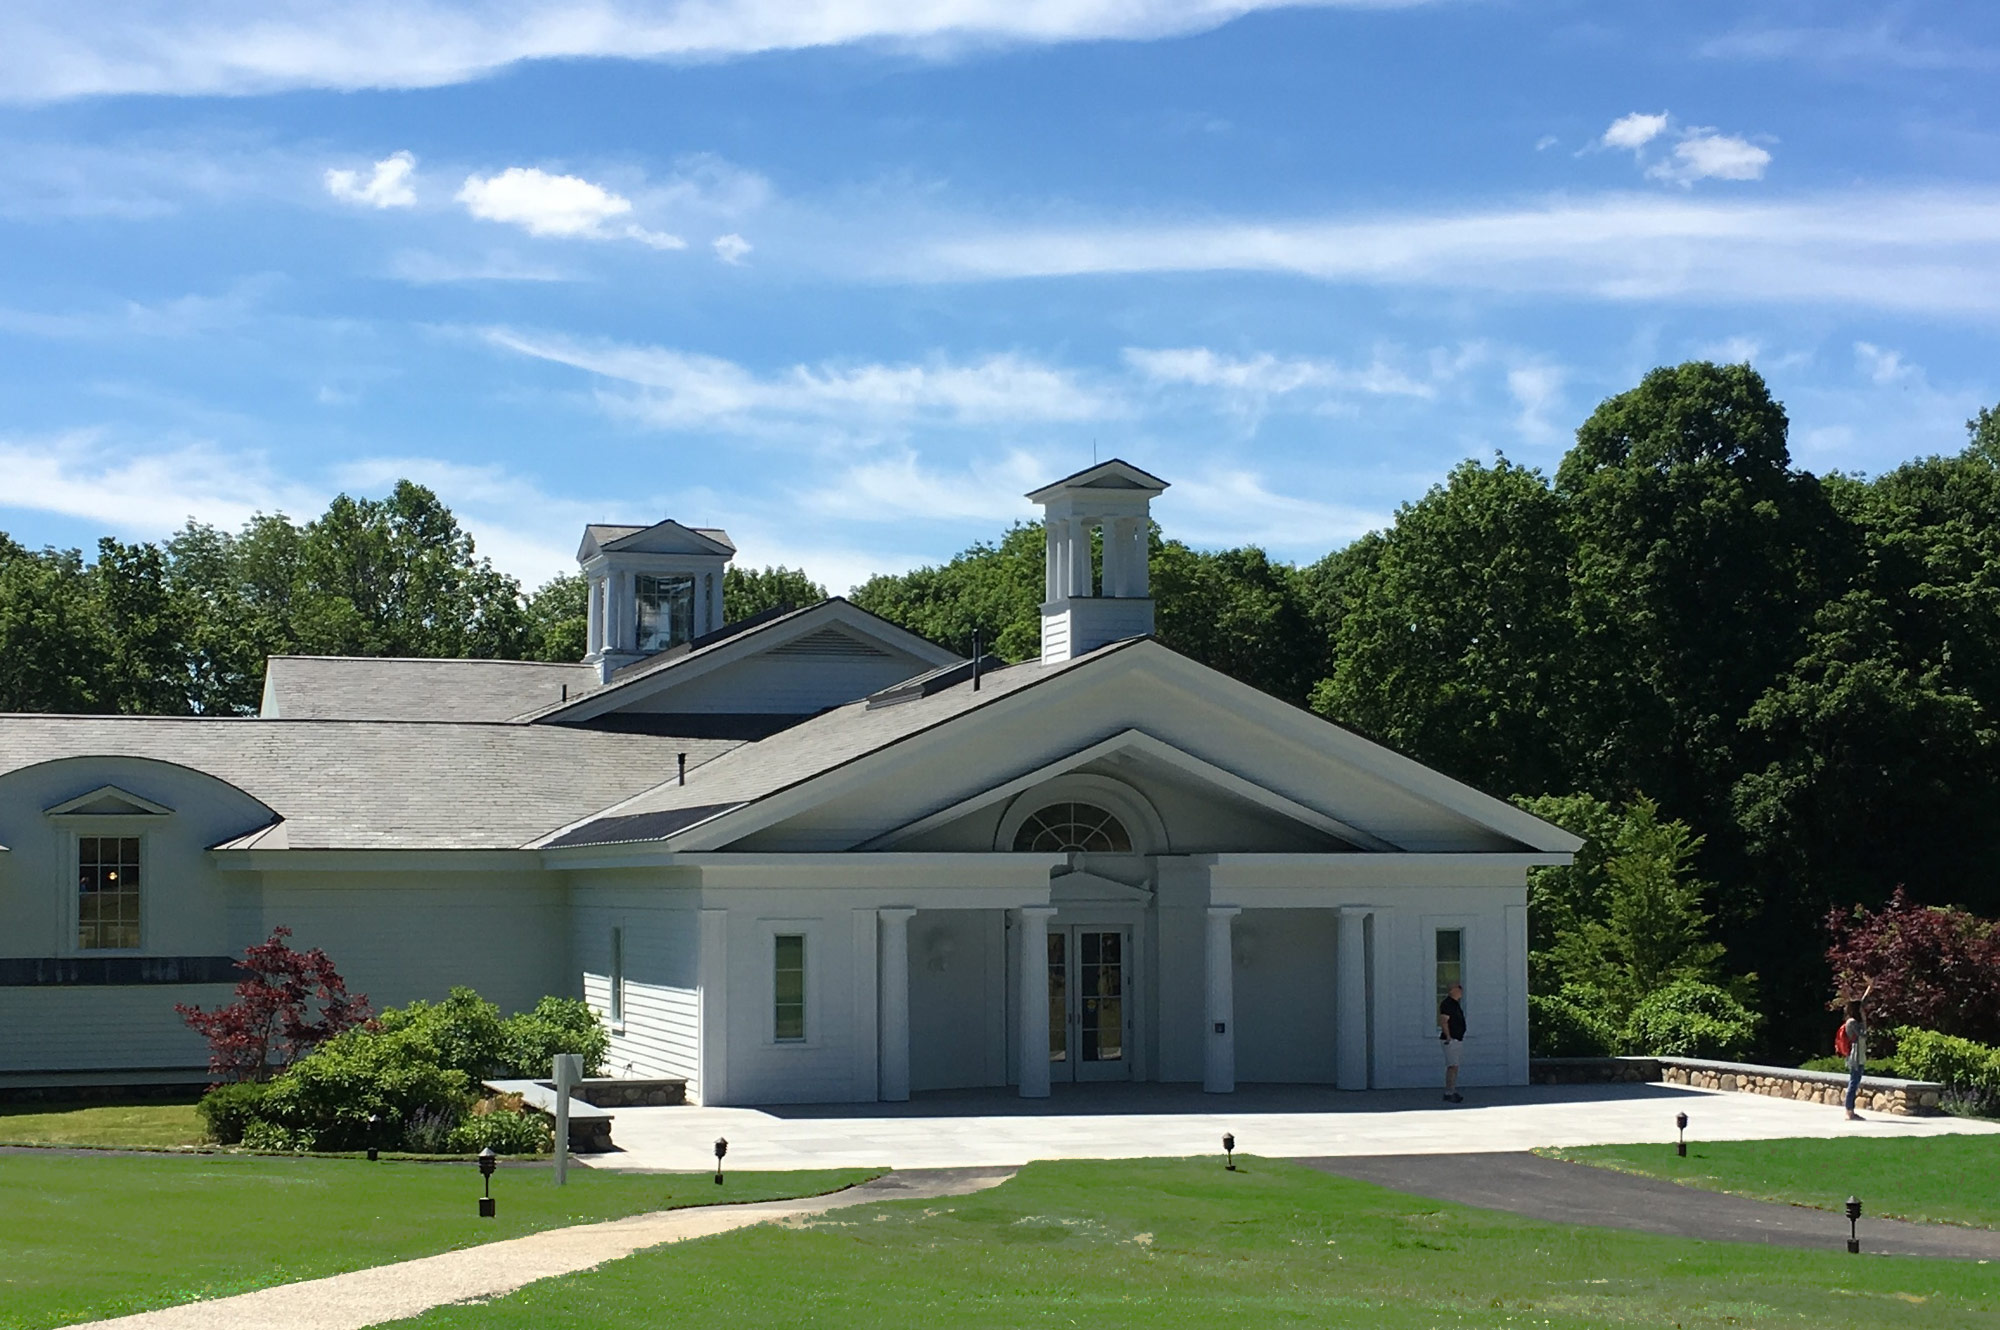 About Norman Rockwell Museum